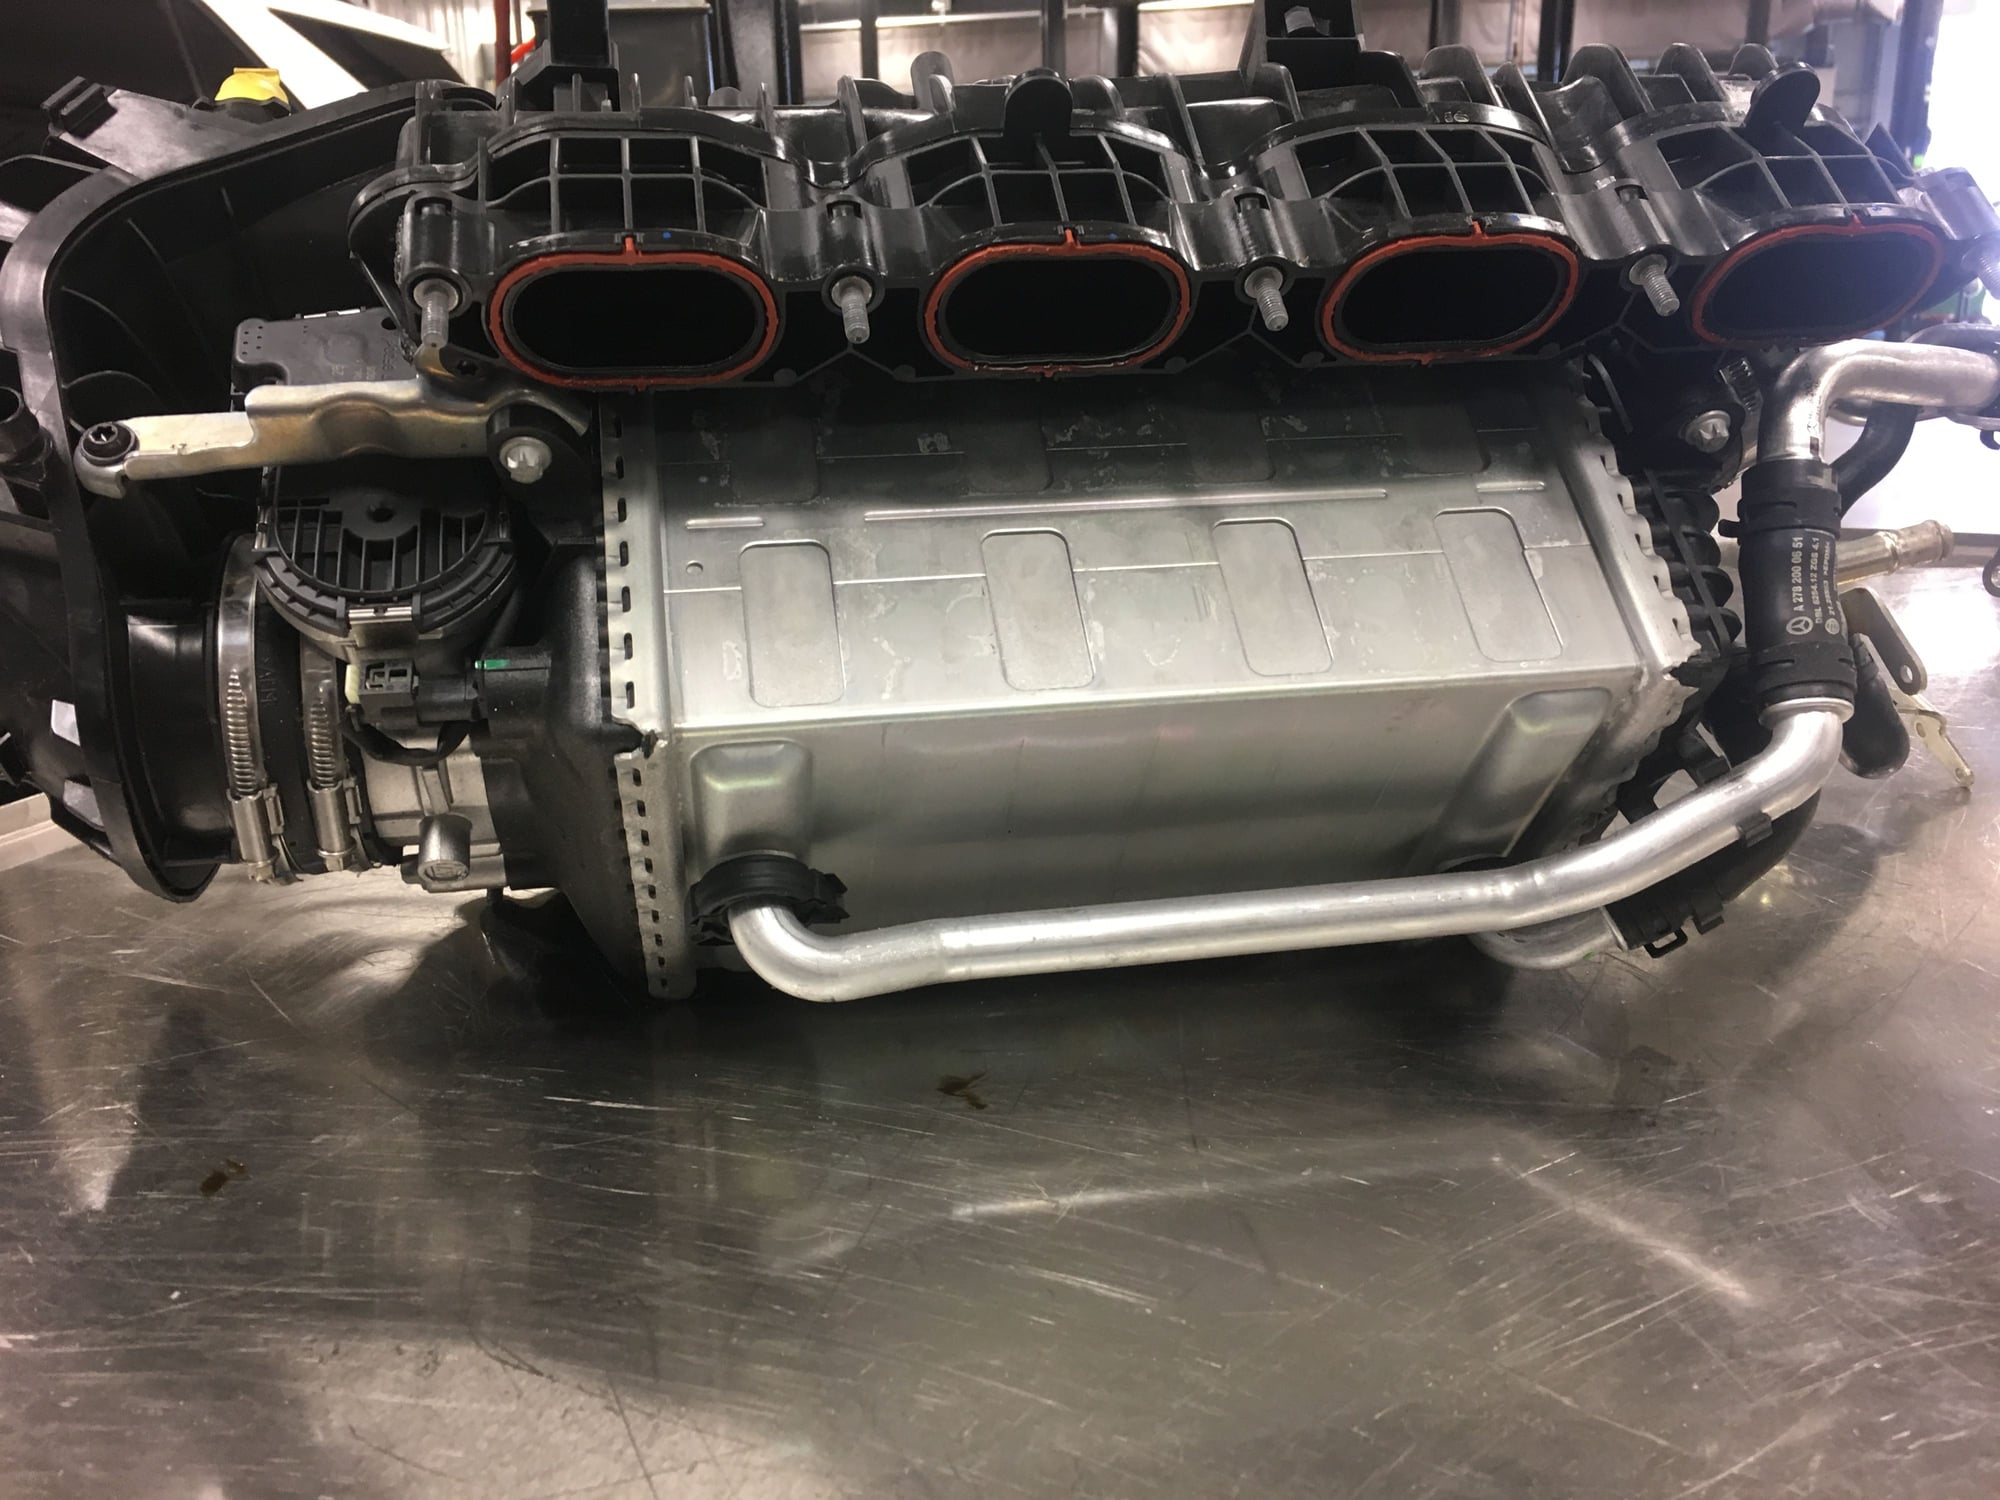 Engine - Complete - M157 Part out 2017 S63 4-Matic convertible - Used - 2017 to 2019 Mercedes-Benz S63 AMG - Jacksonville, FL 32246, United States